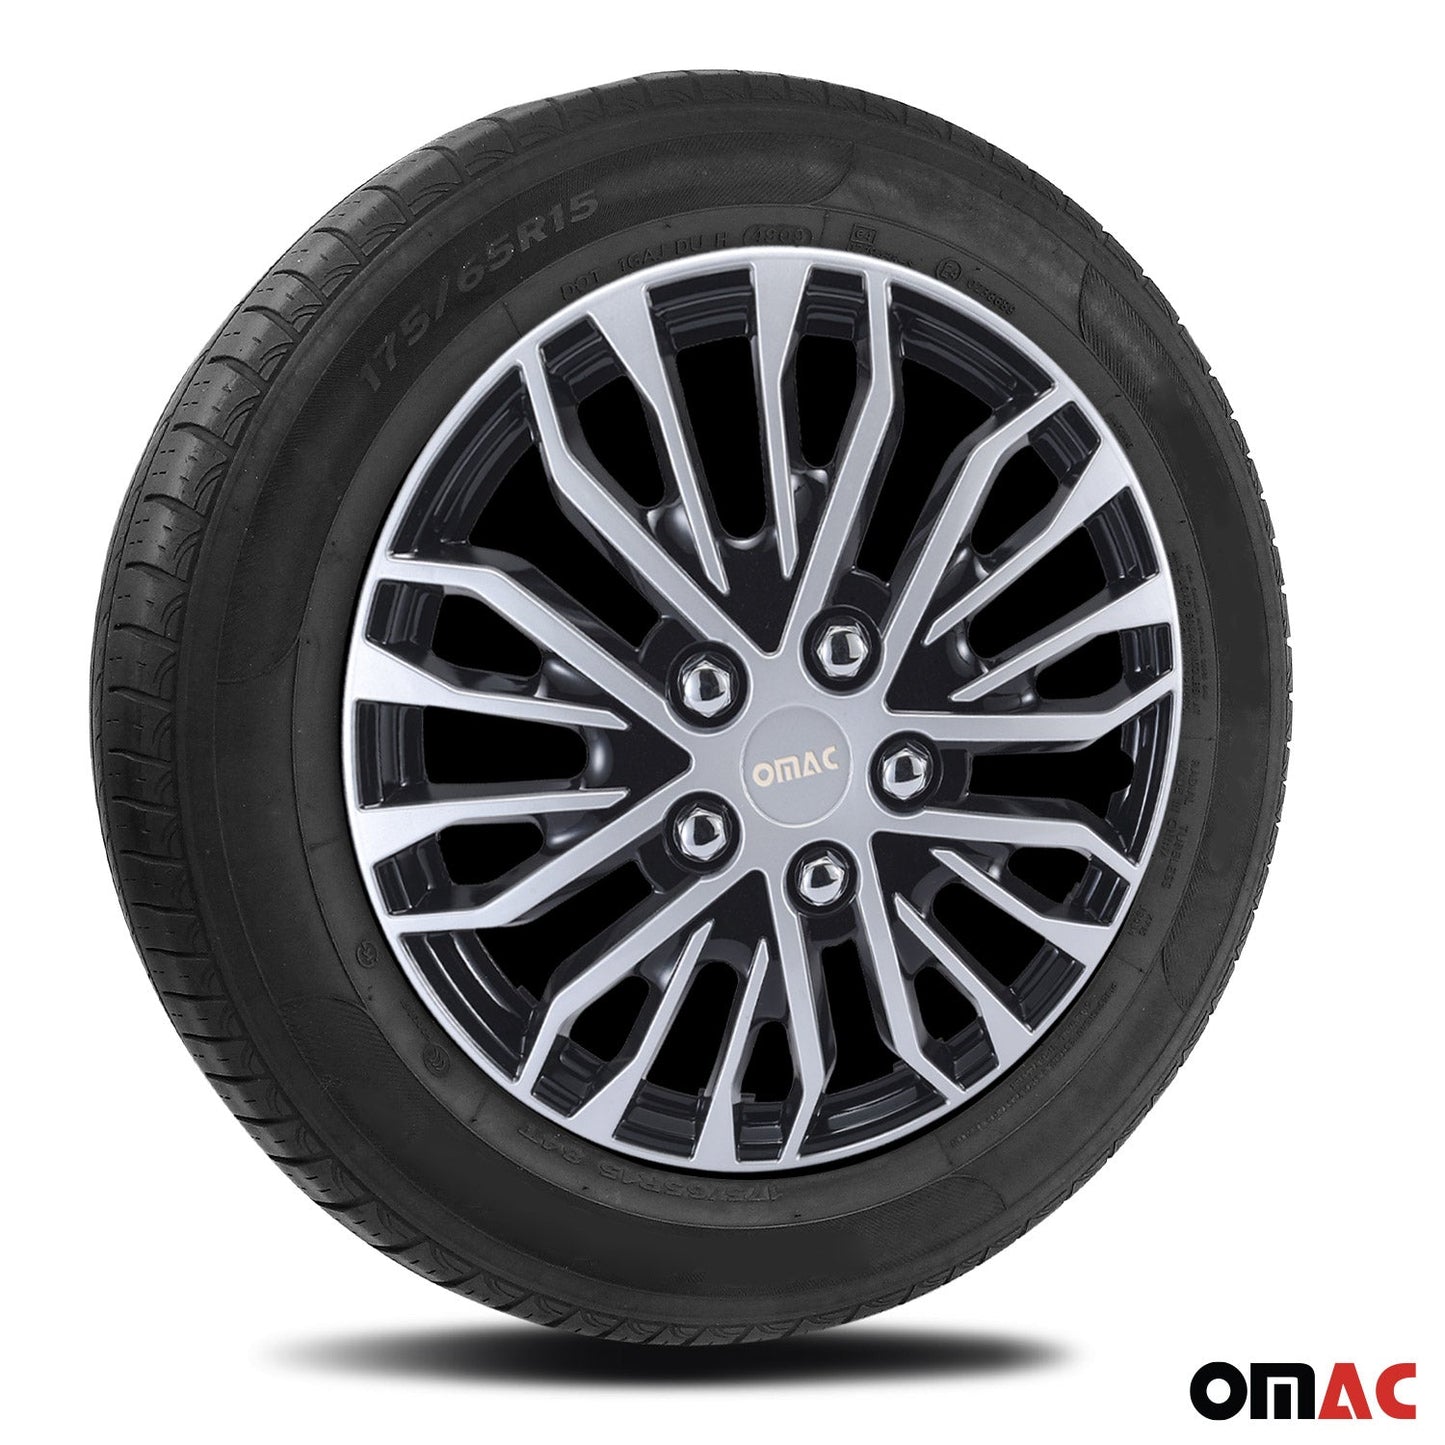 OMAC 15 Inch Wheel Rim Covers Hubcaps Durable Snap On ABS Silver Black 4x OMAC-WE41-SVBK15